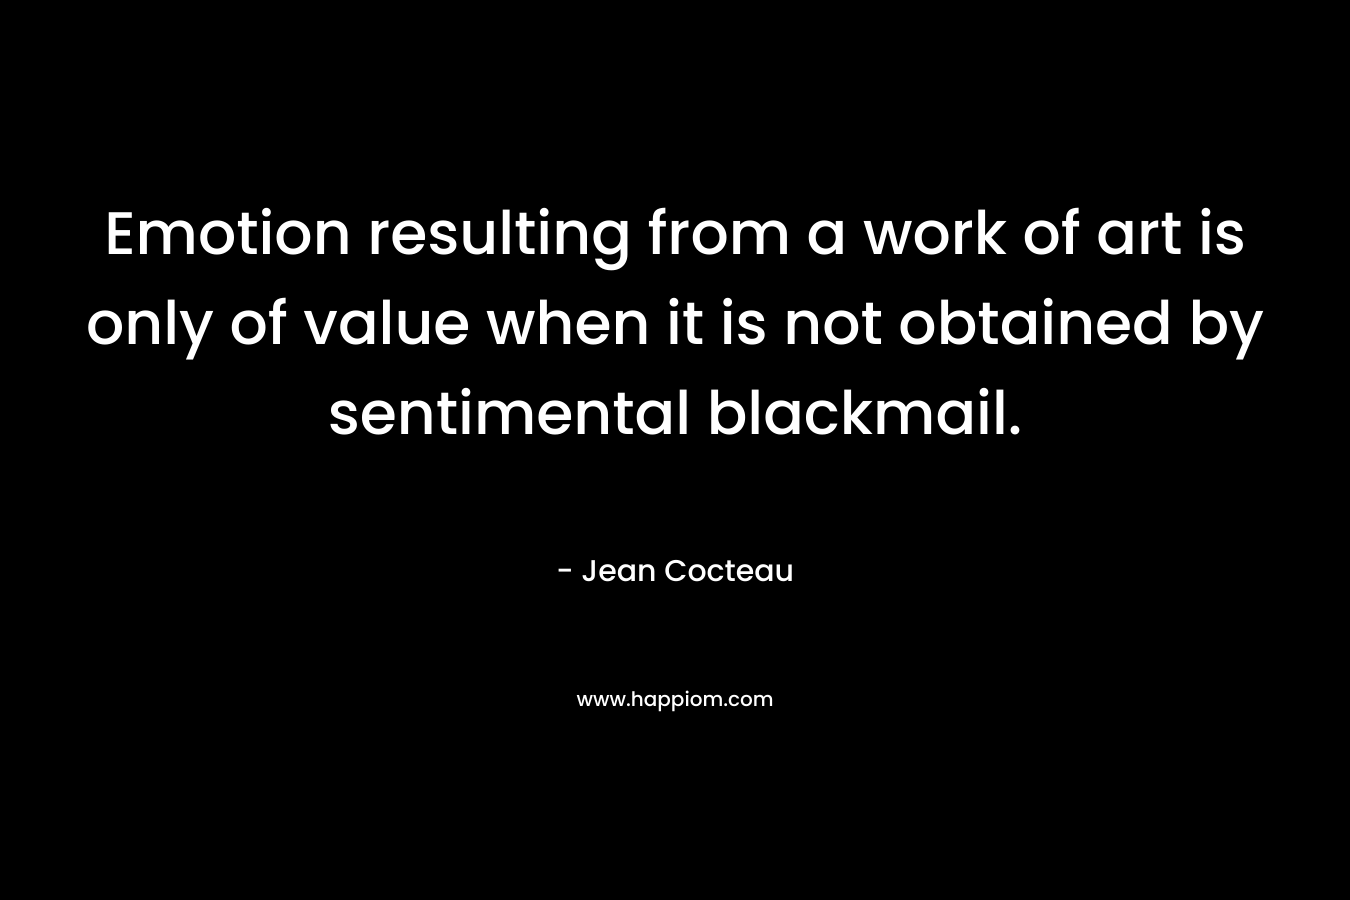 Emotion resulting from a work of art is only of value when it is not obtained by sentimental blackmail. – Jean Cocteau